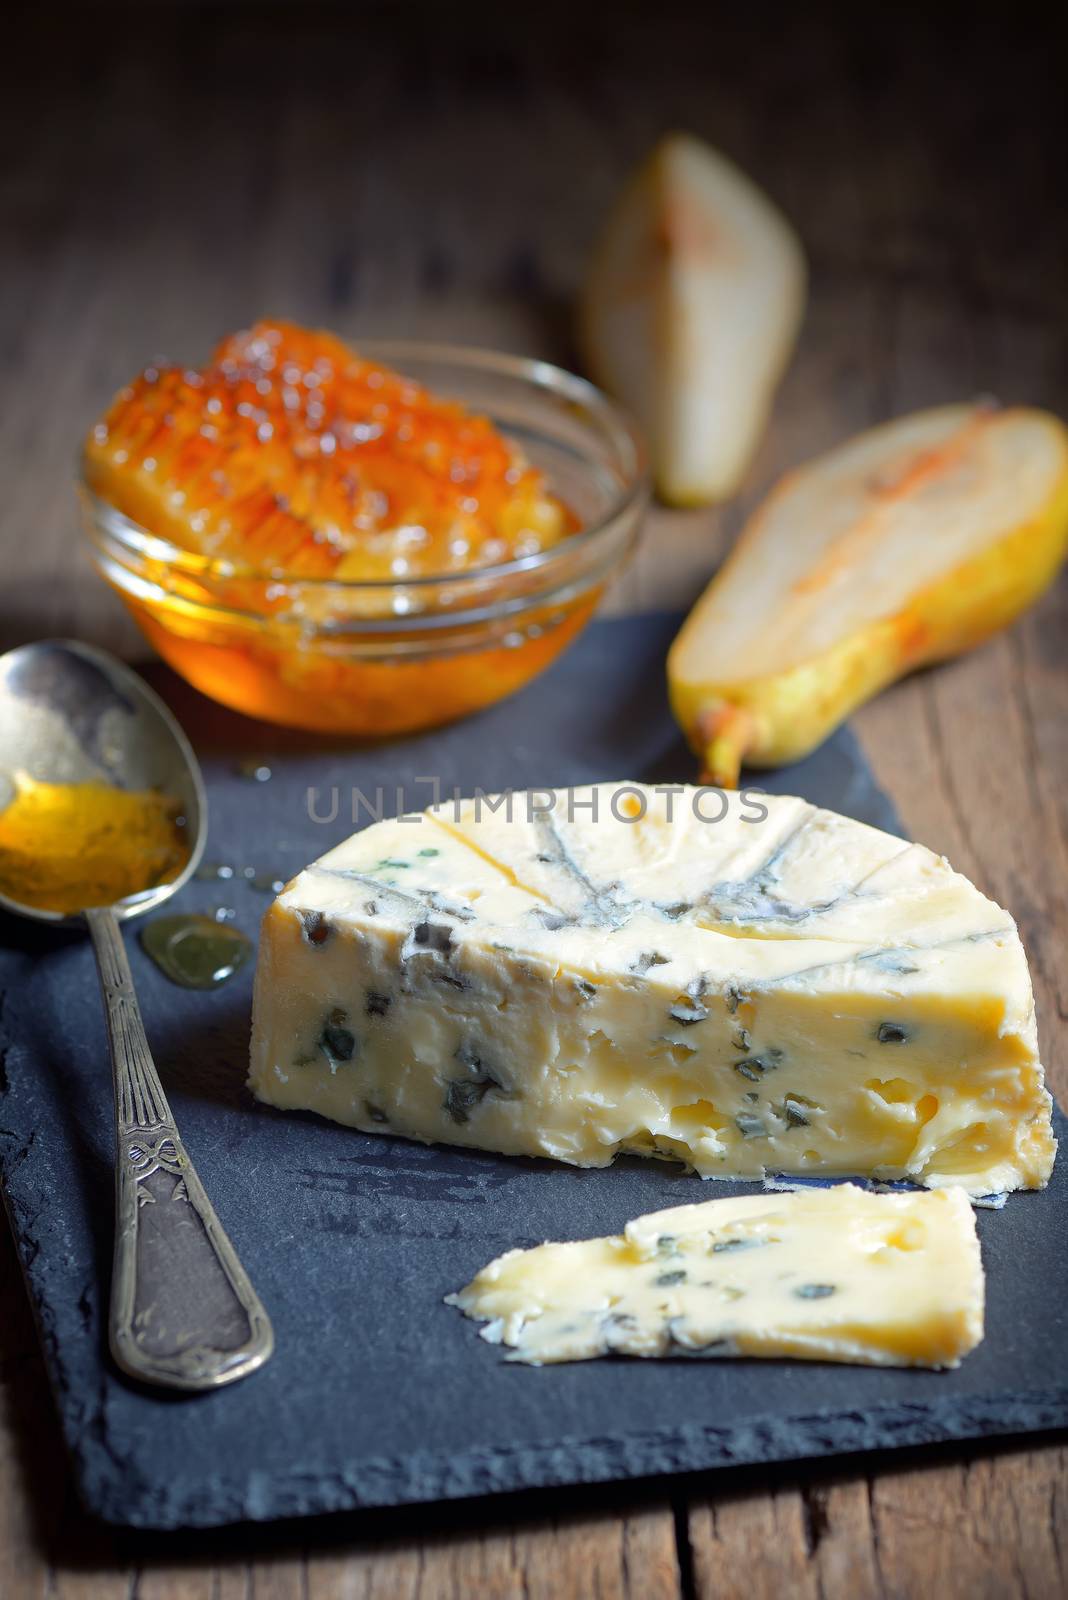 Blue Cheese and honey by mady70